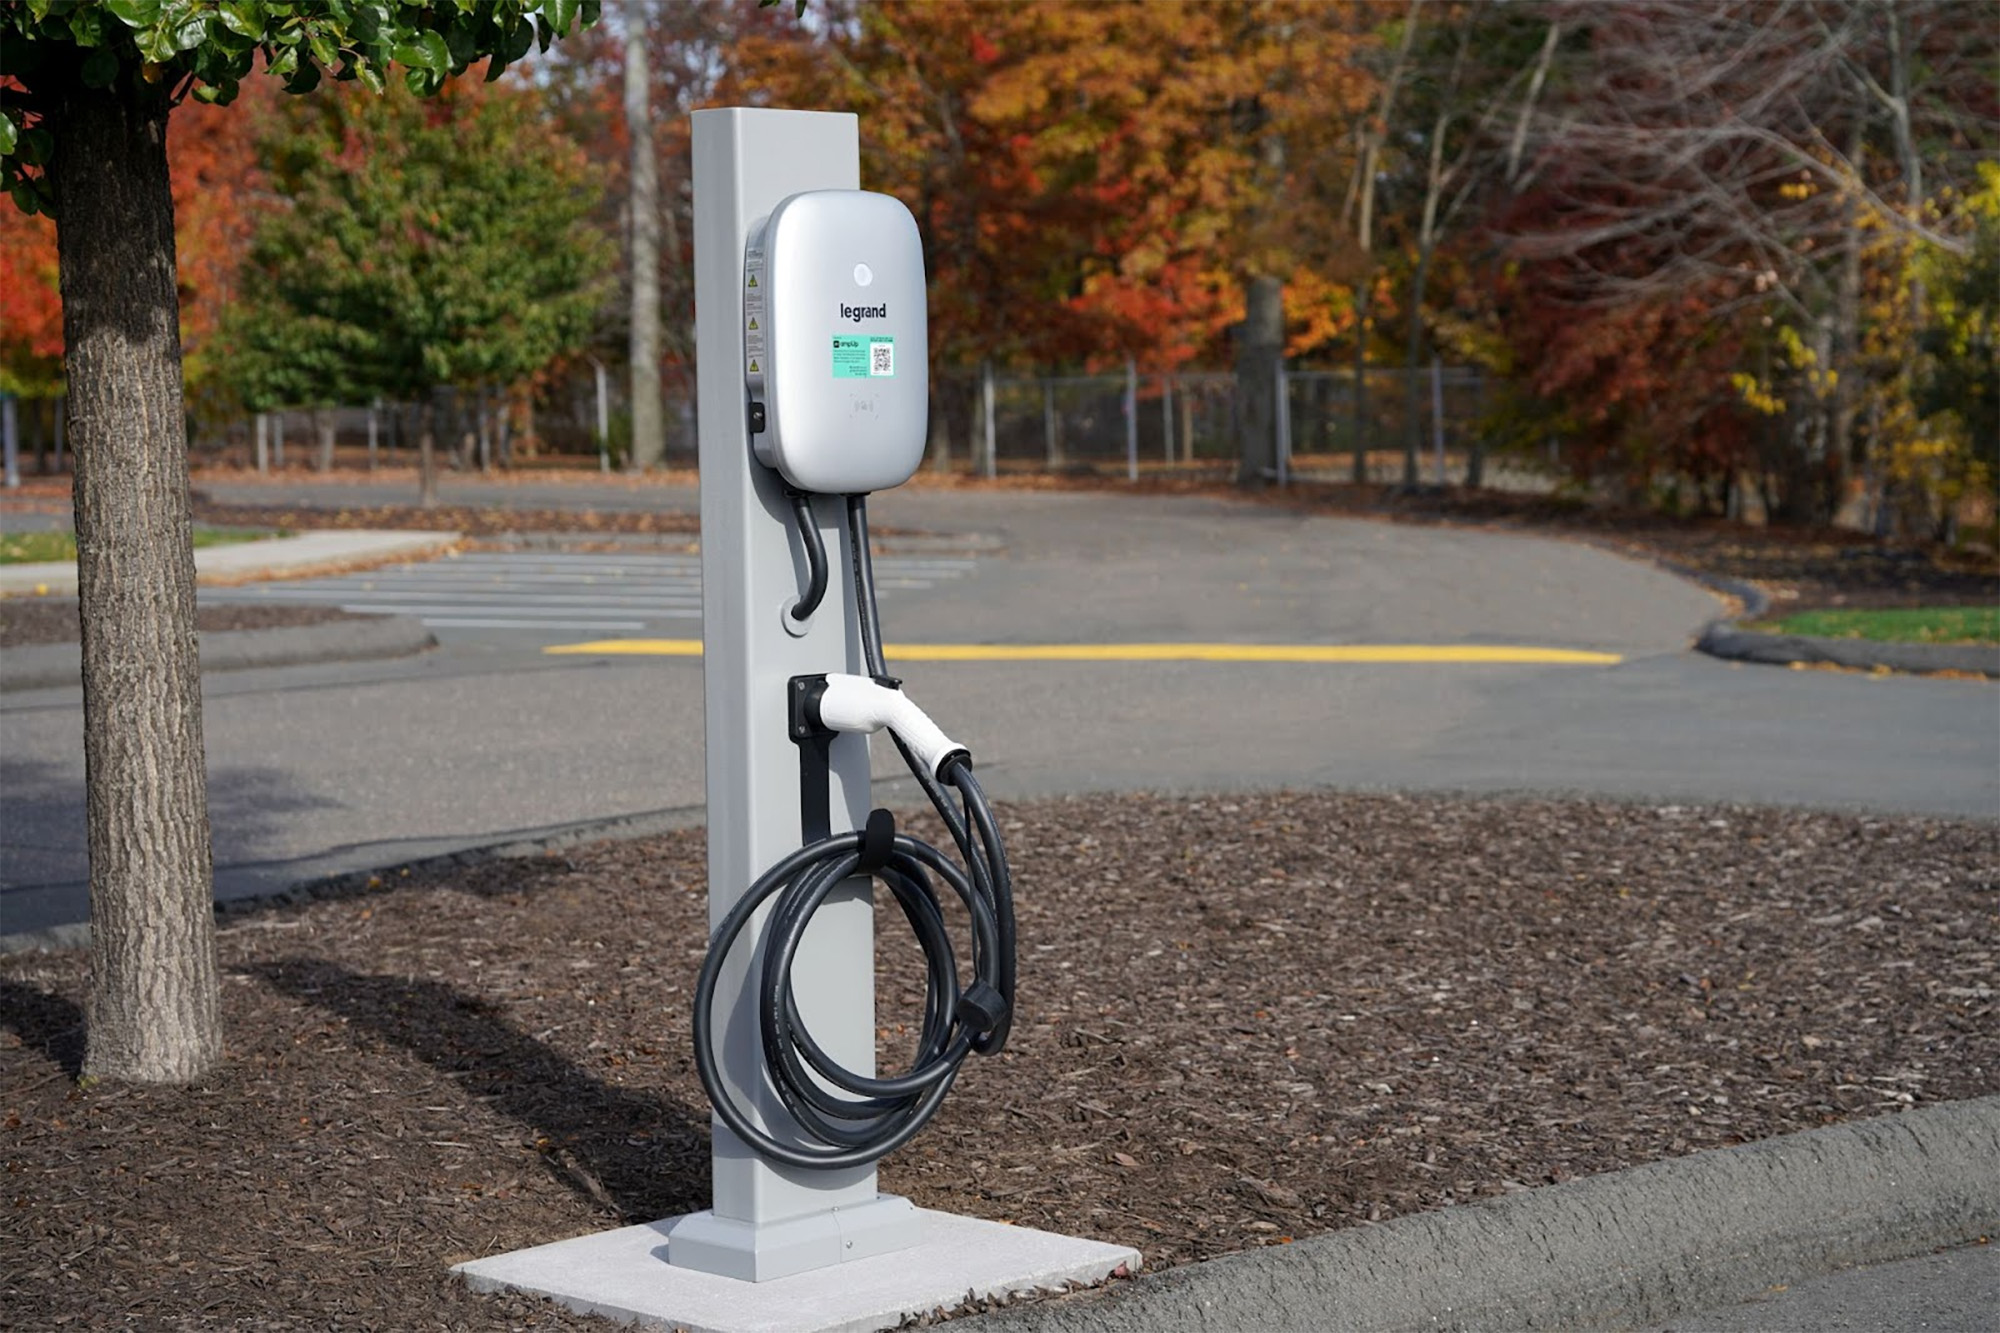 Legrand's Networked Level 2 Commercial Electric Vehicle Charger building product